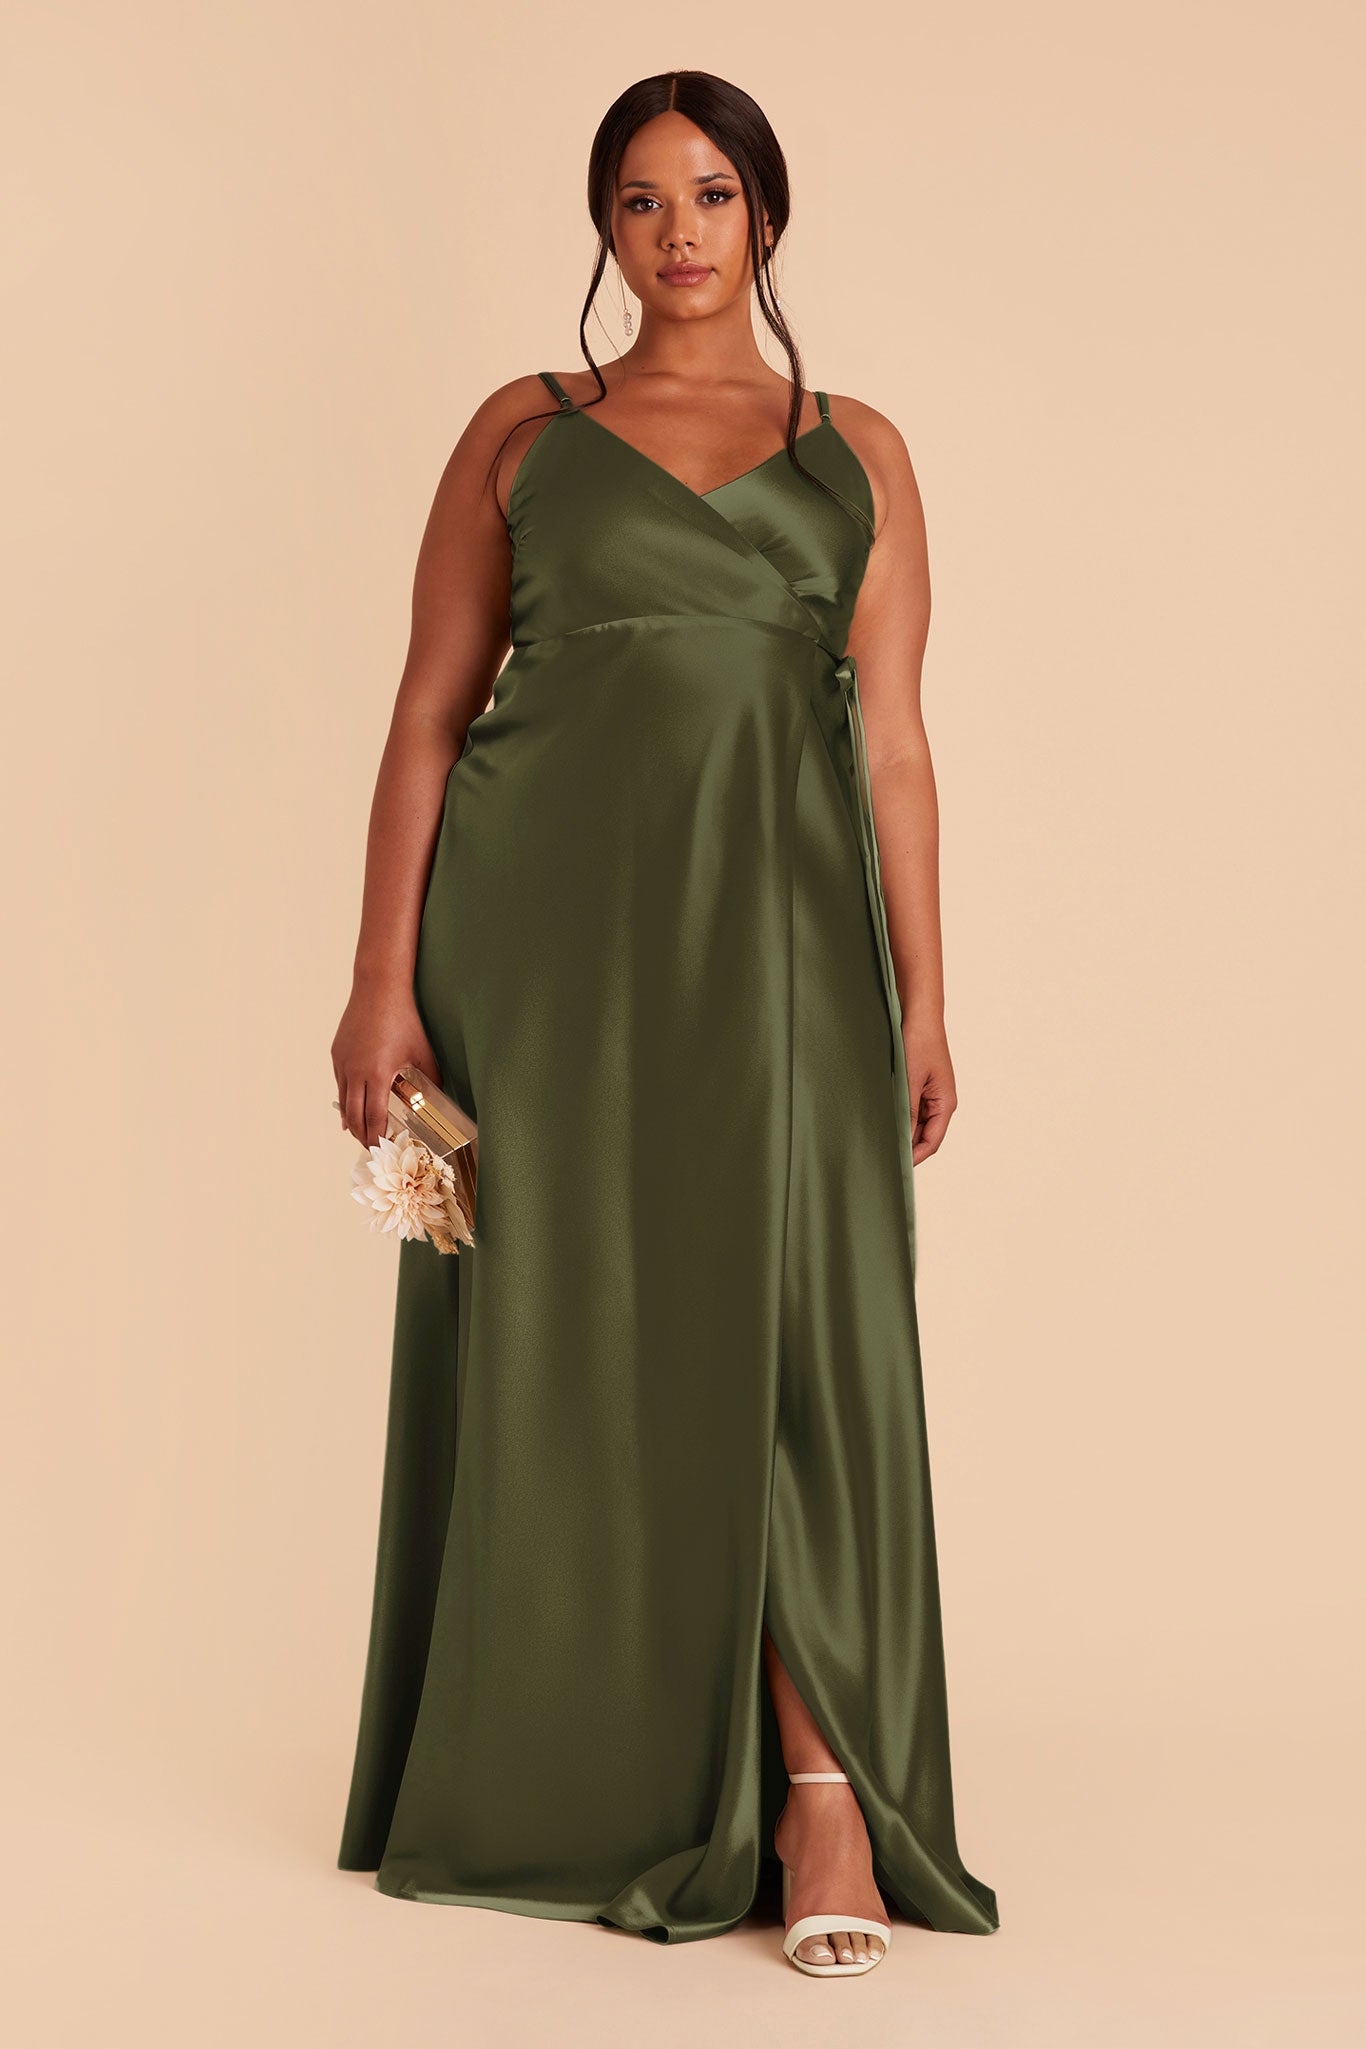 Matte Satin Dress in Olive by Birdy Grey